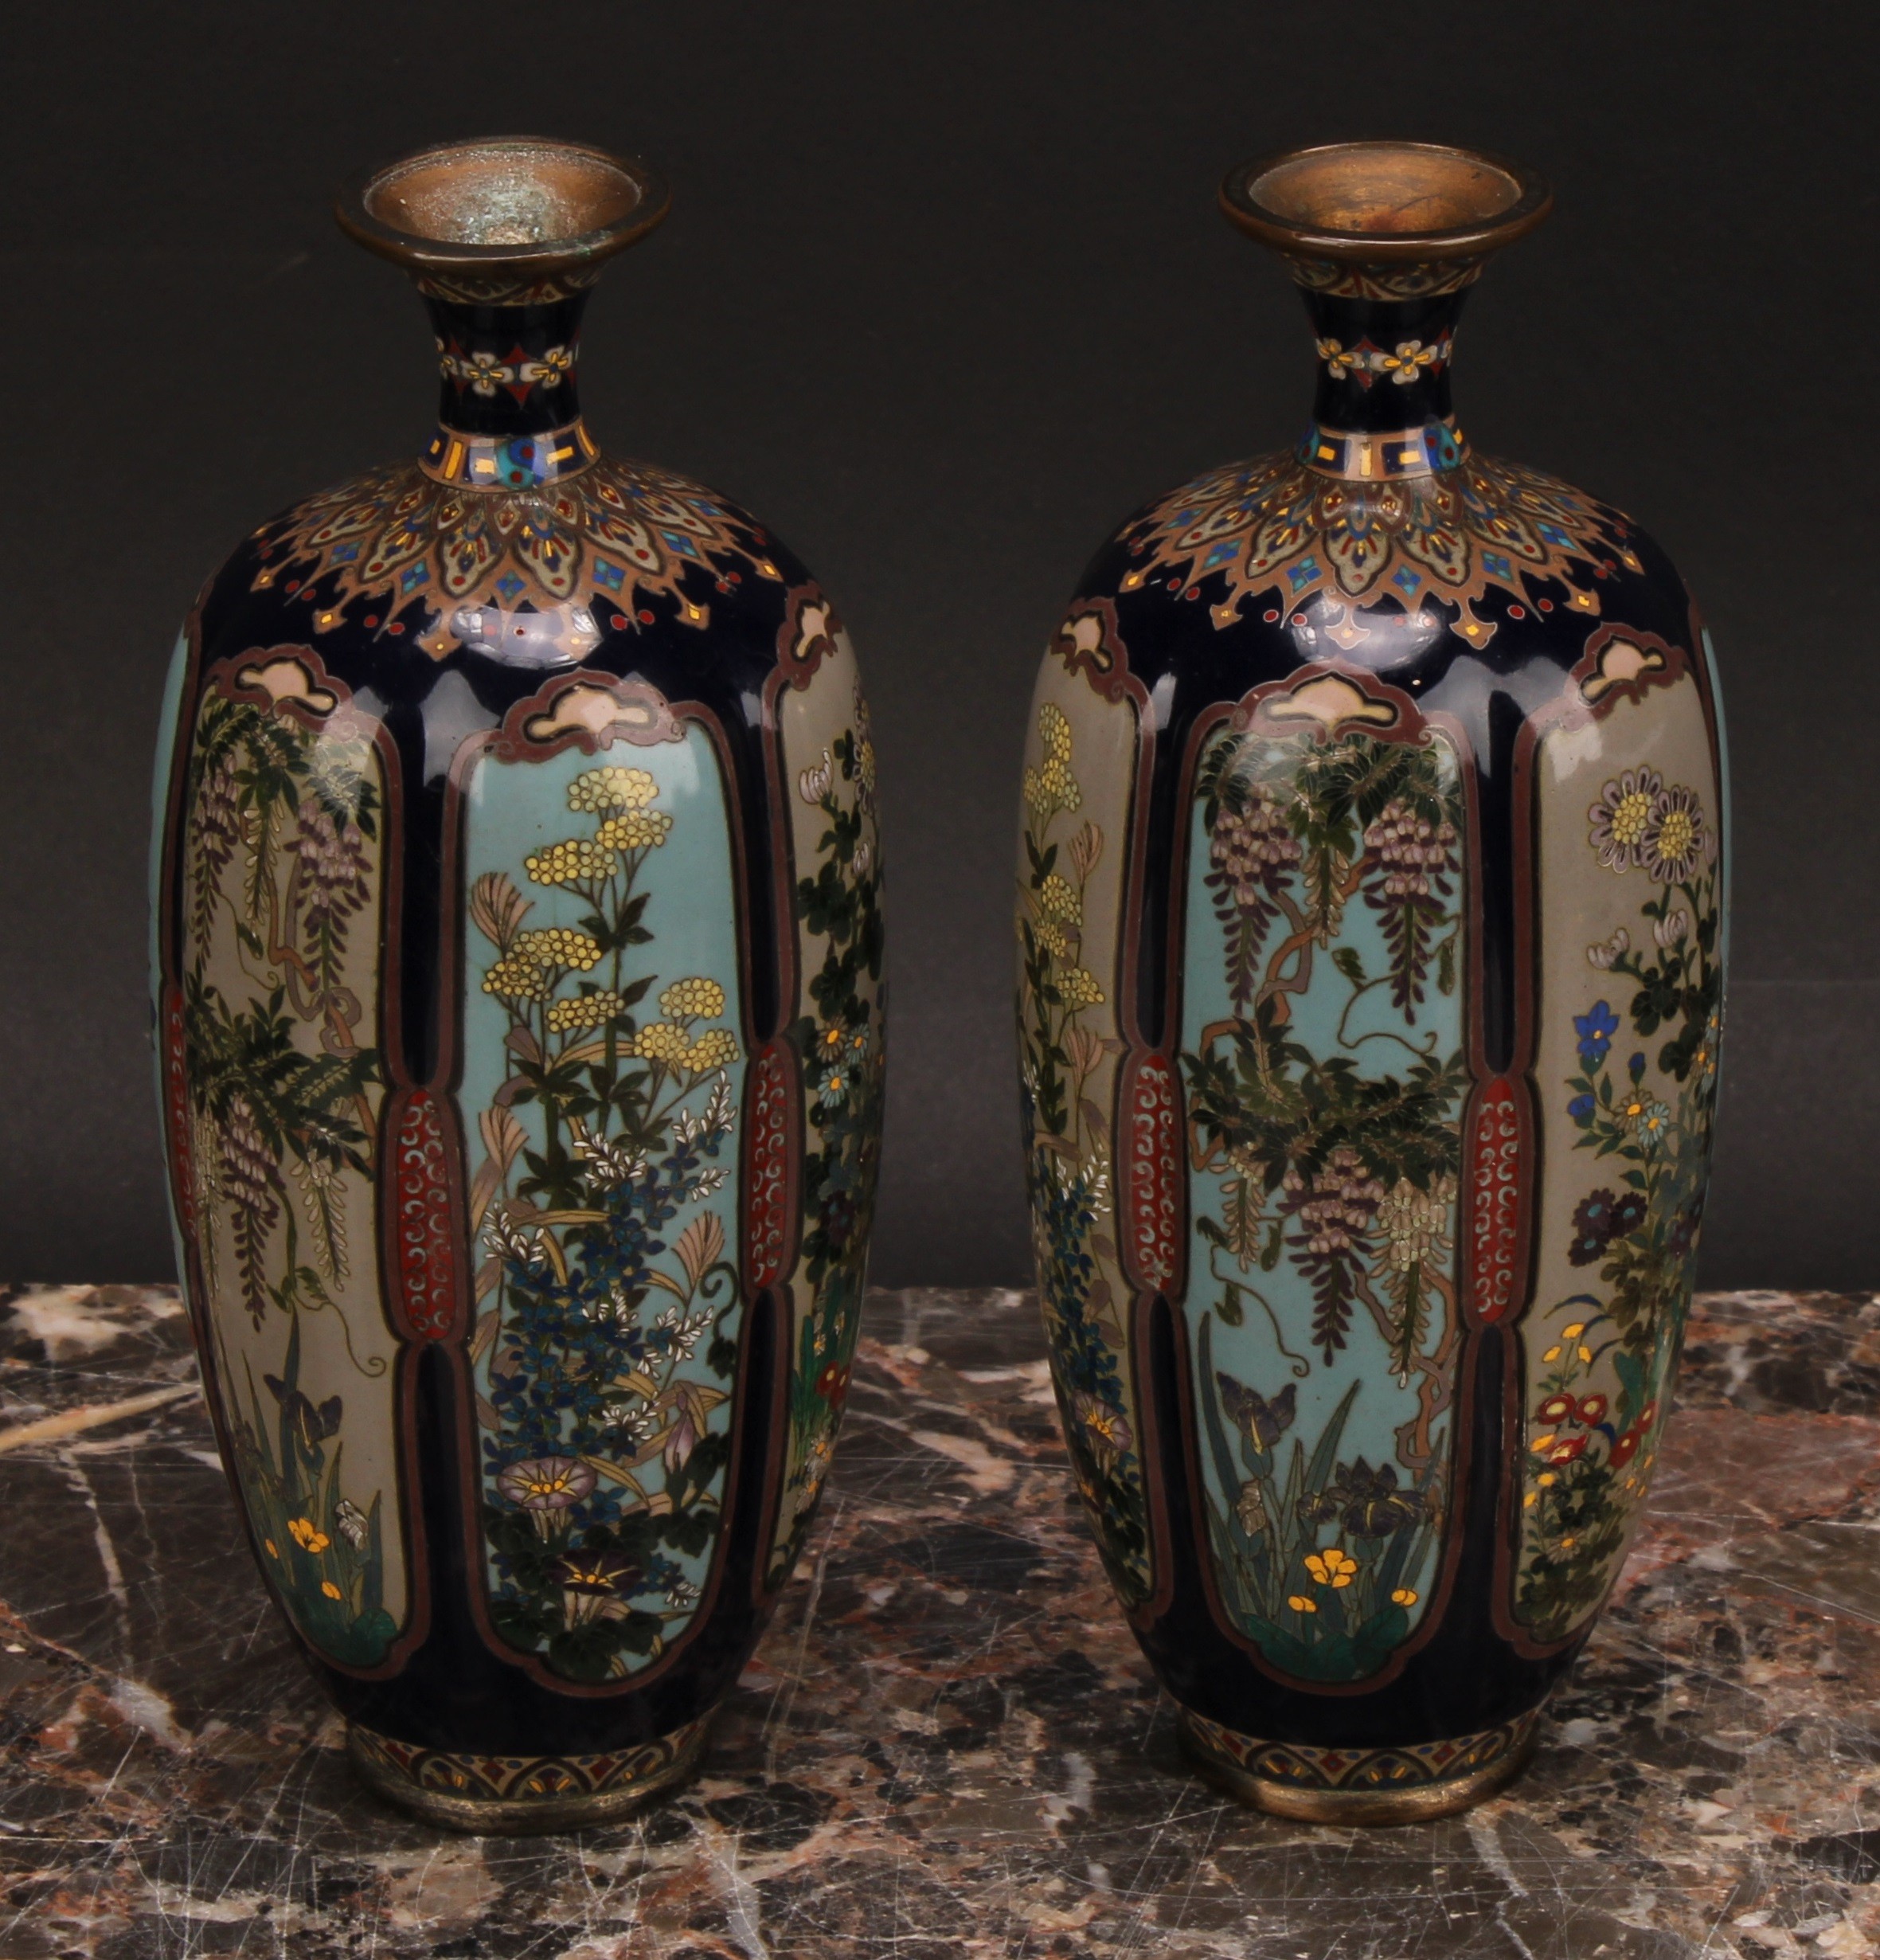 A pair of Japanese cloisonne enamel lobed ovoid vases, painted in polychrome with flowers within - Image 5 of 6